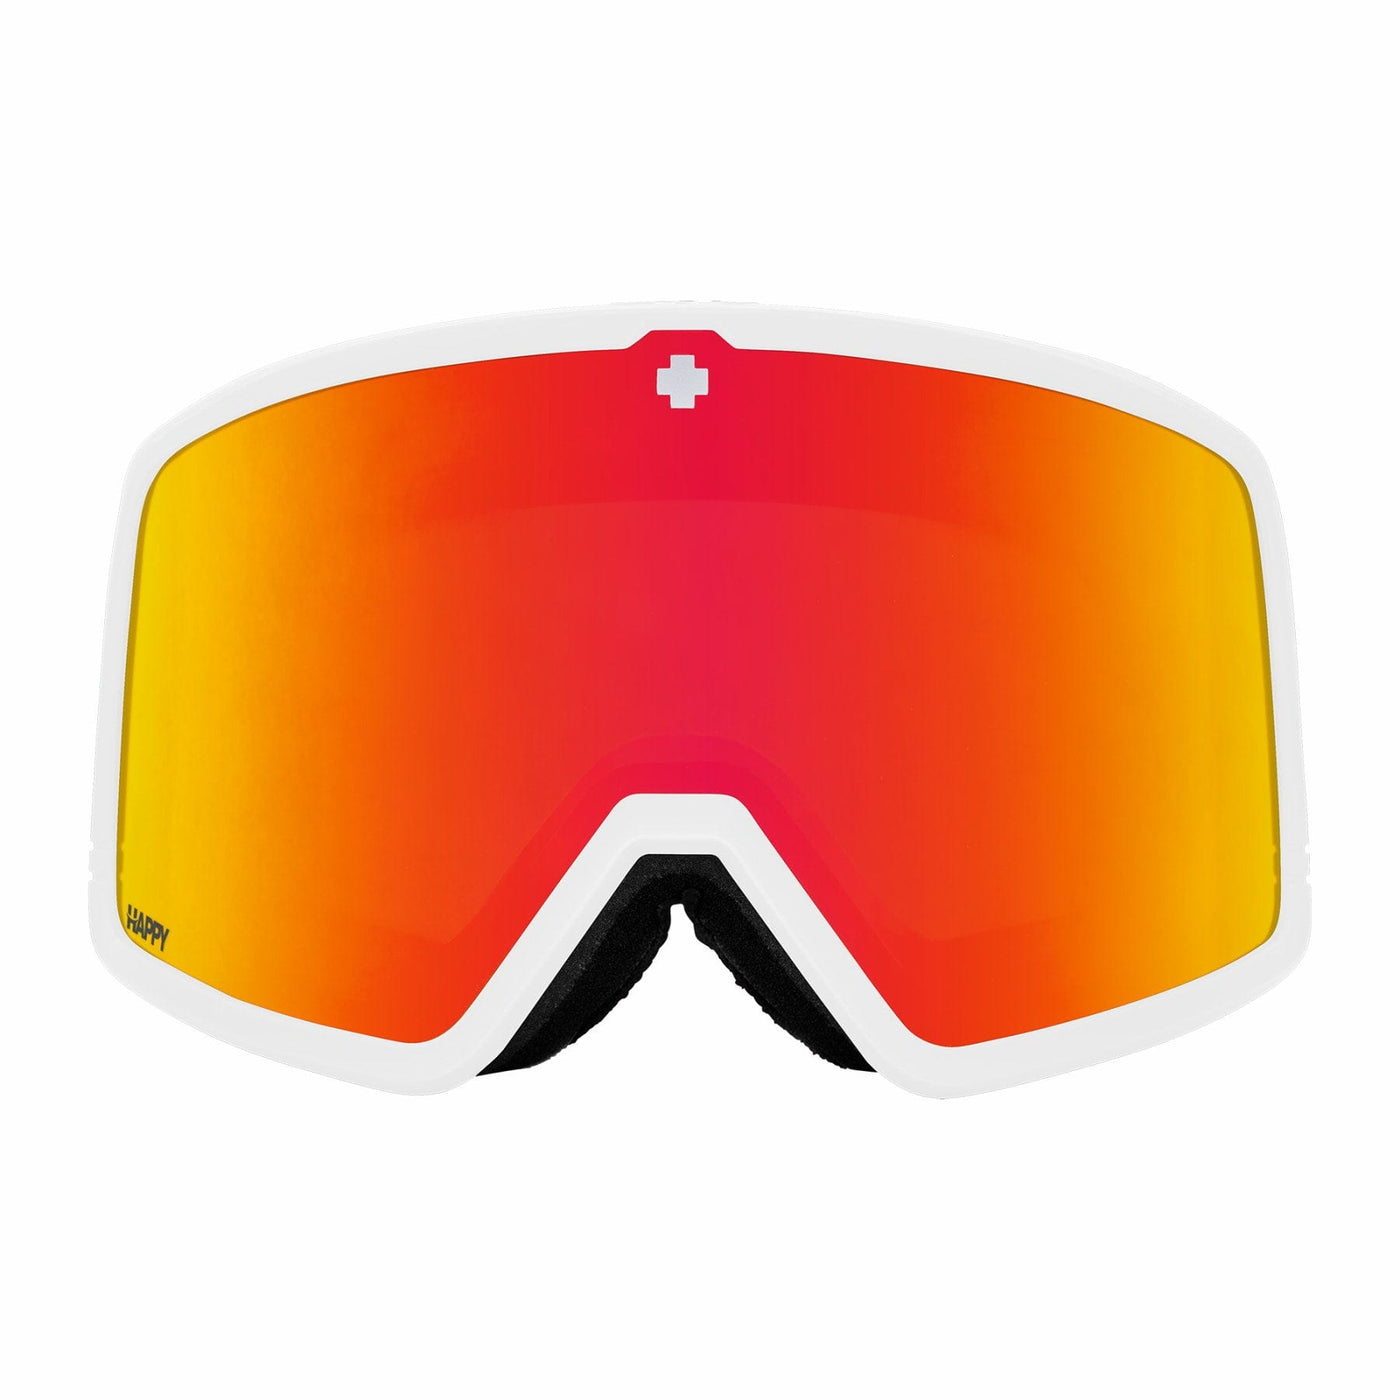 Replacement lens for snow goggles